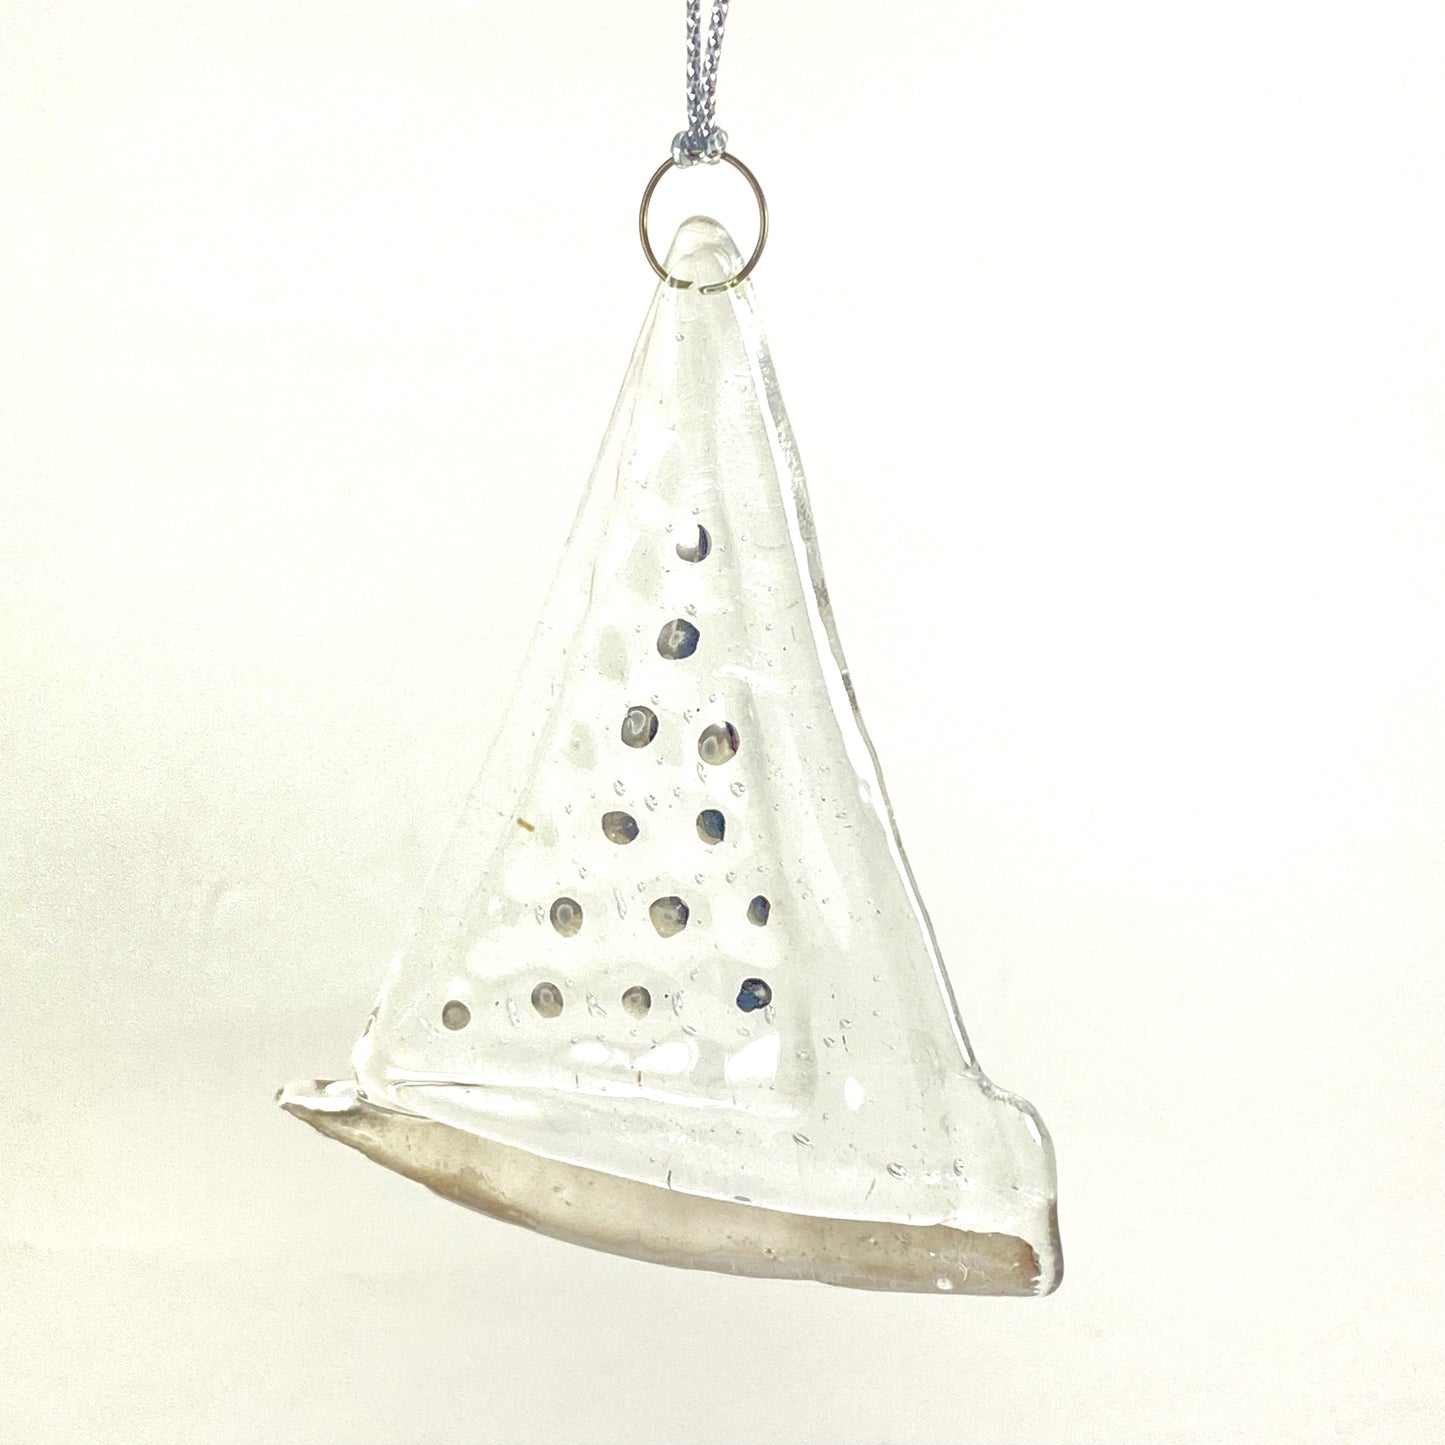 Abstract Clear Ornament Silver Luster #23